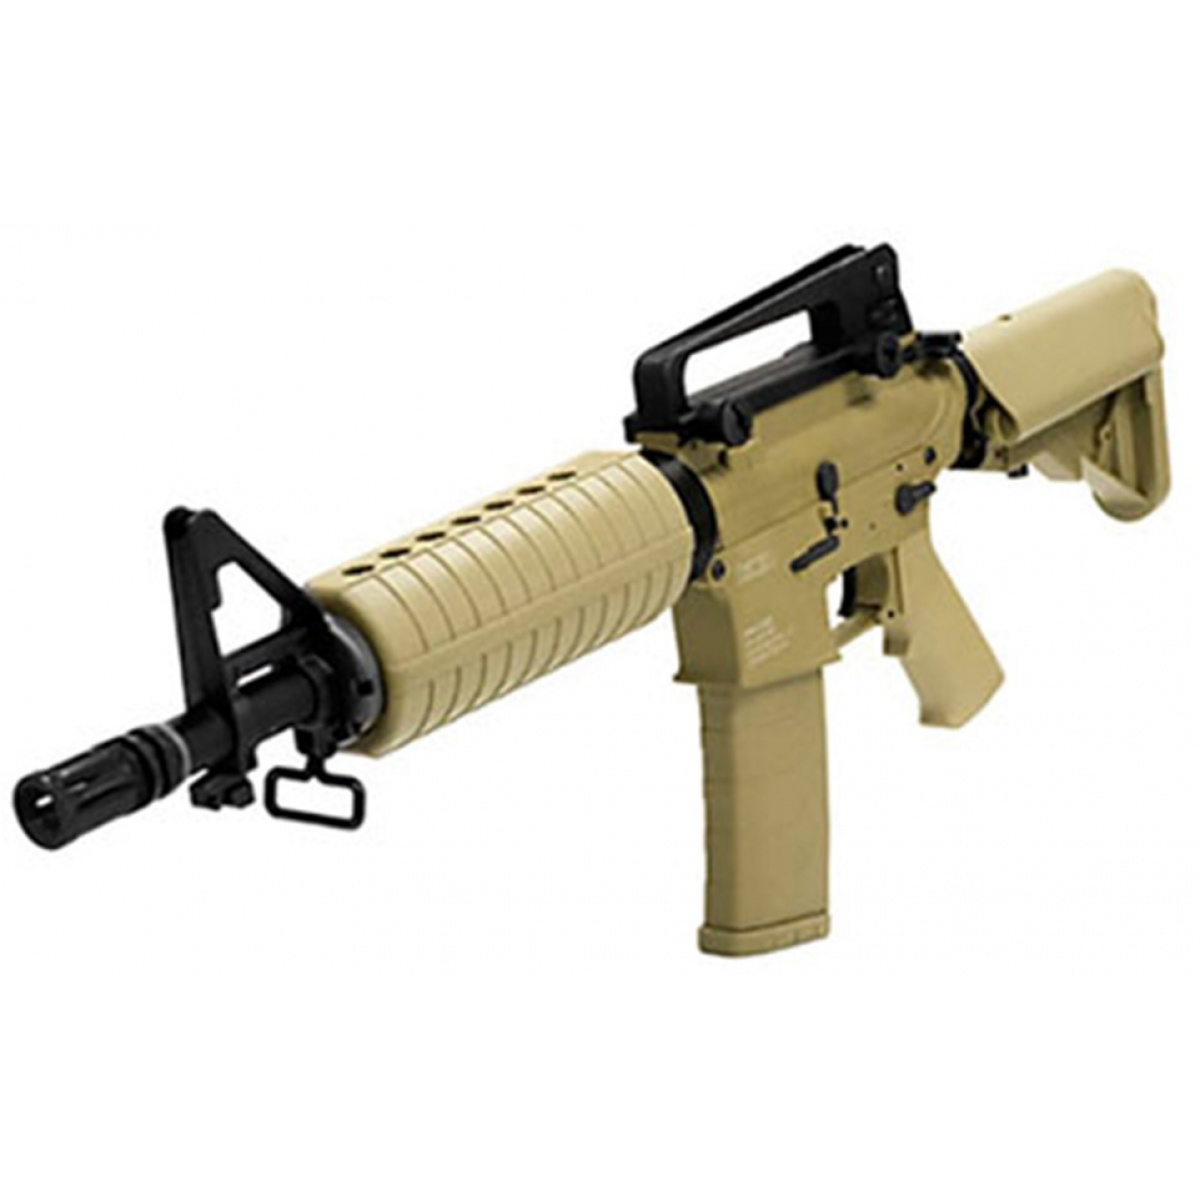 KWA Km4a1 Metal Carbine AEG 2 Airsoft Rifle for sale online 